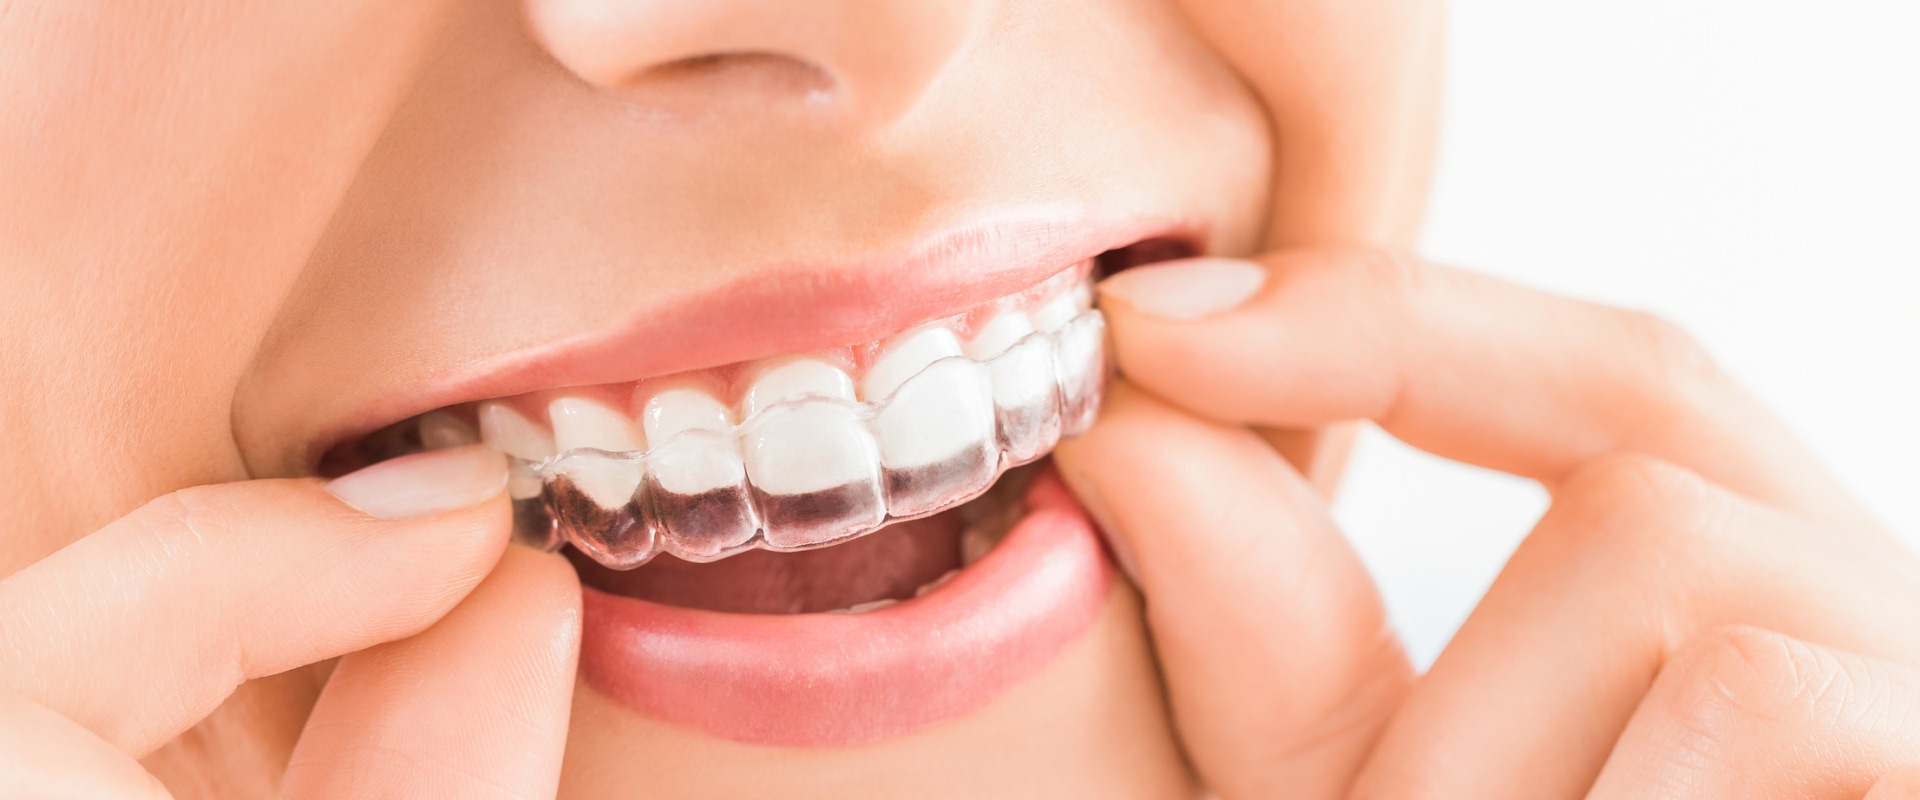 How Long Does It Take to See Results with Invisalign?